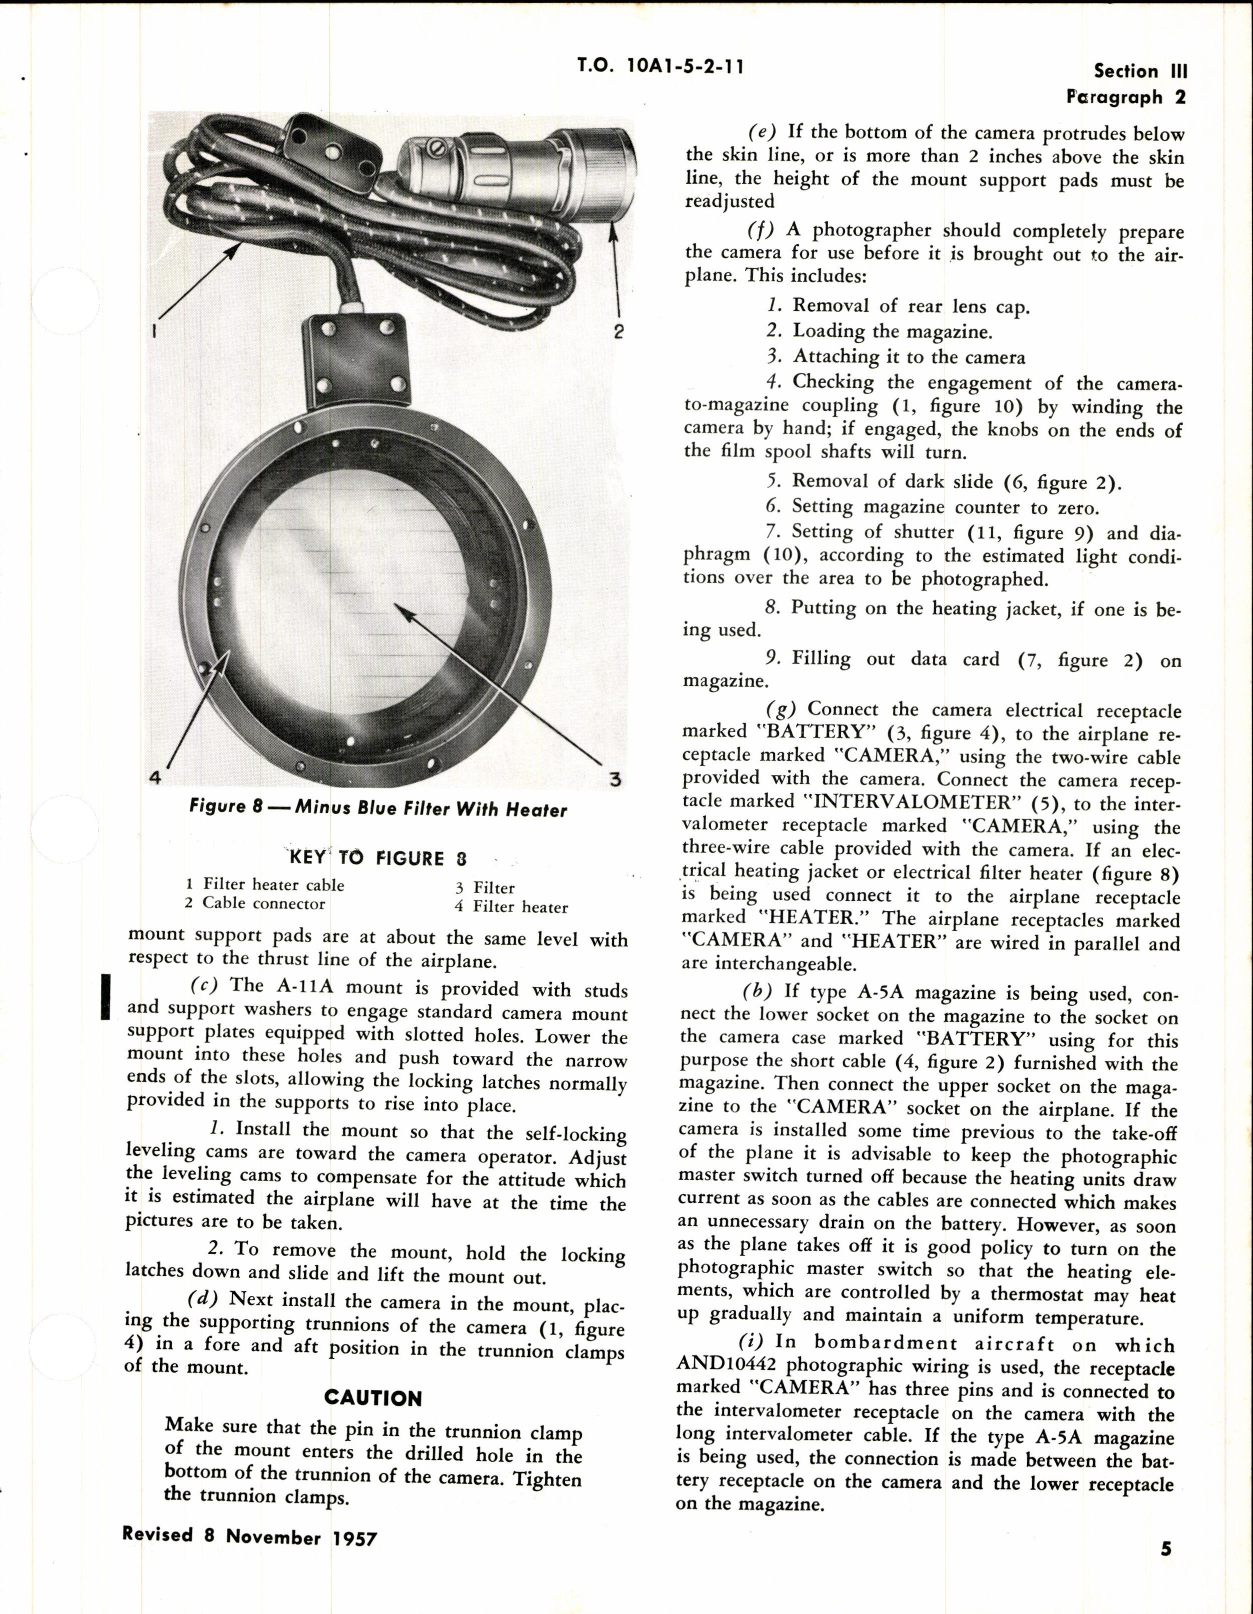 Sample page 7 from AirCorps Library document: Operation, Service, and Overhaul Instructions with Parts Catalog for Aircraft Camera Type K-17B 